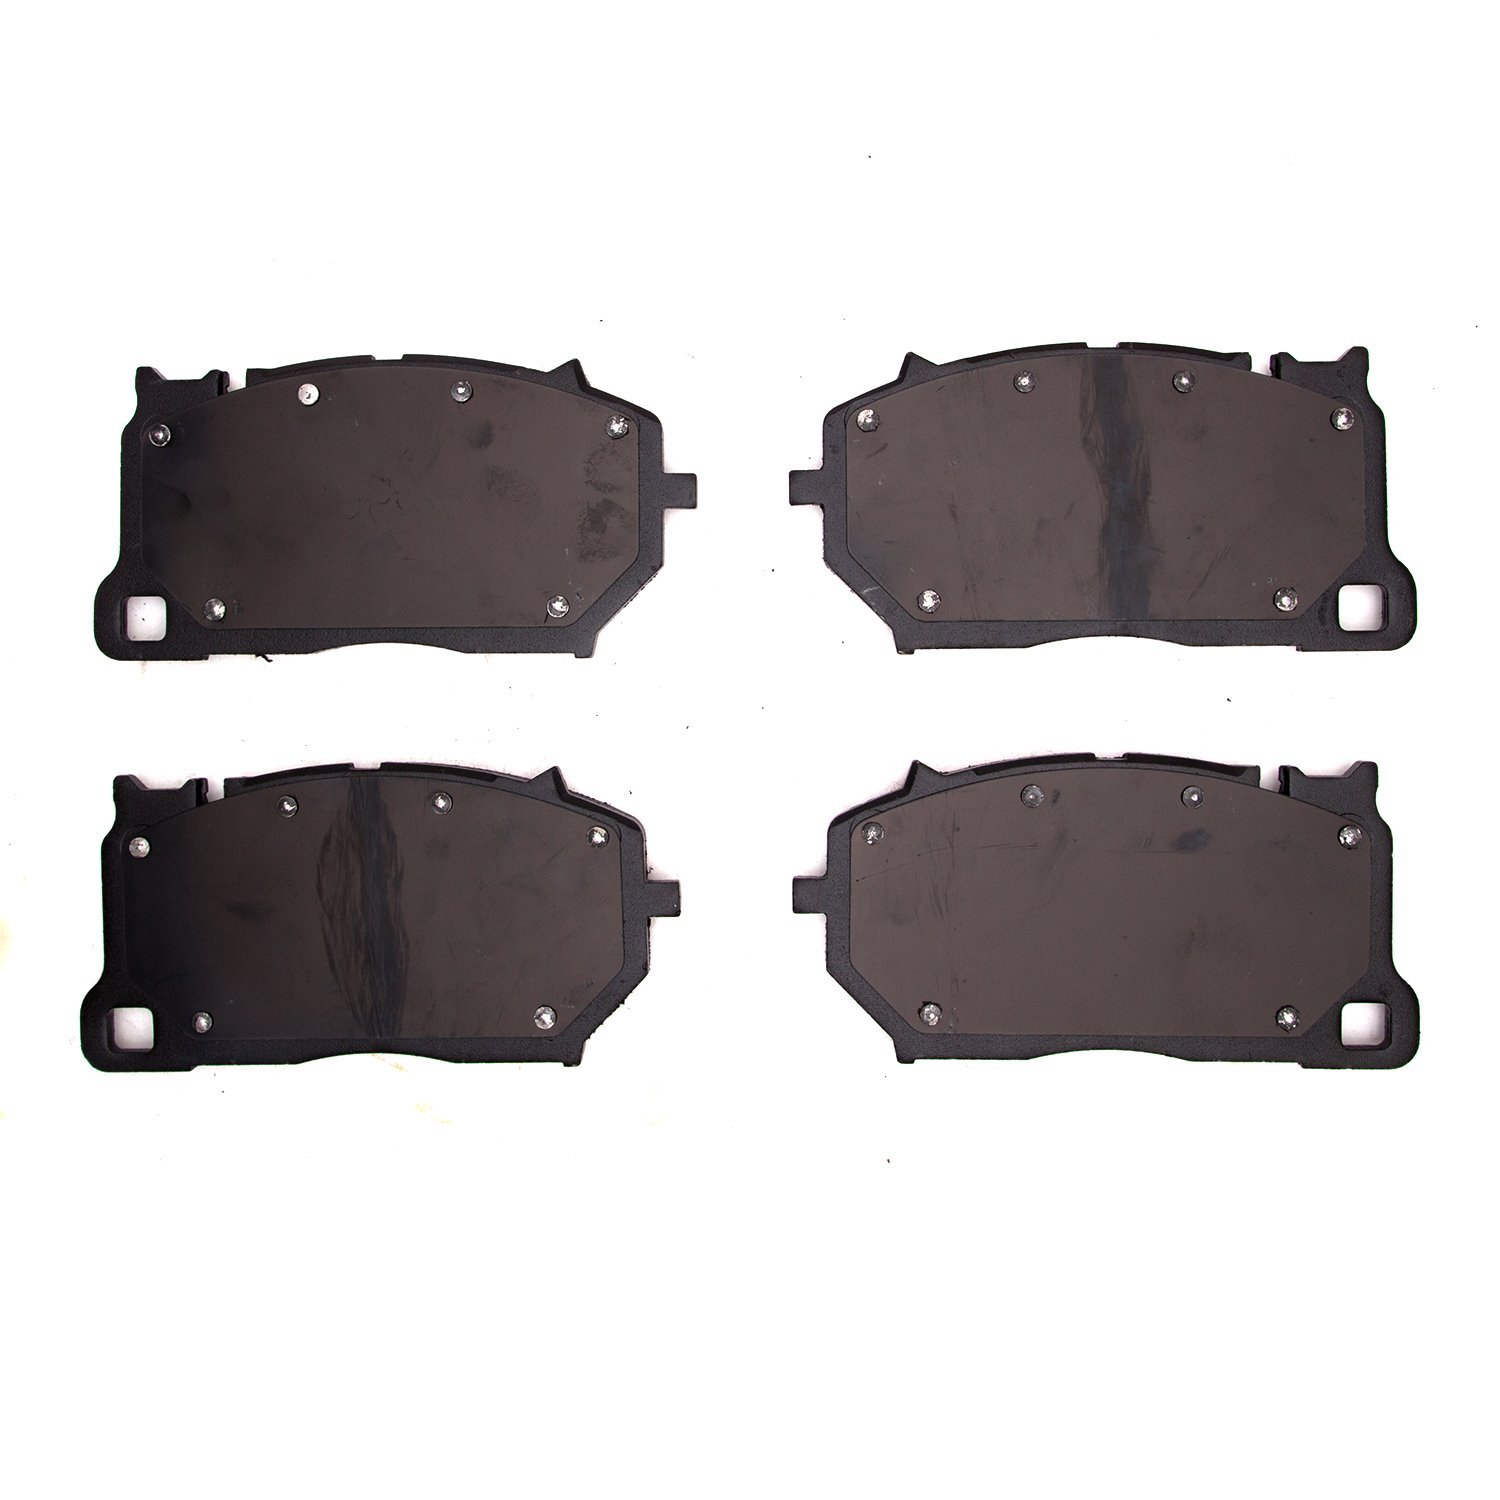 1551-1899-00 5000 Advanced Low-Metallic Brake Pads, Fits Select Multiple Makes/Models, Position: Front